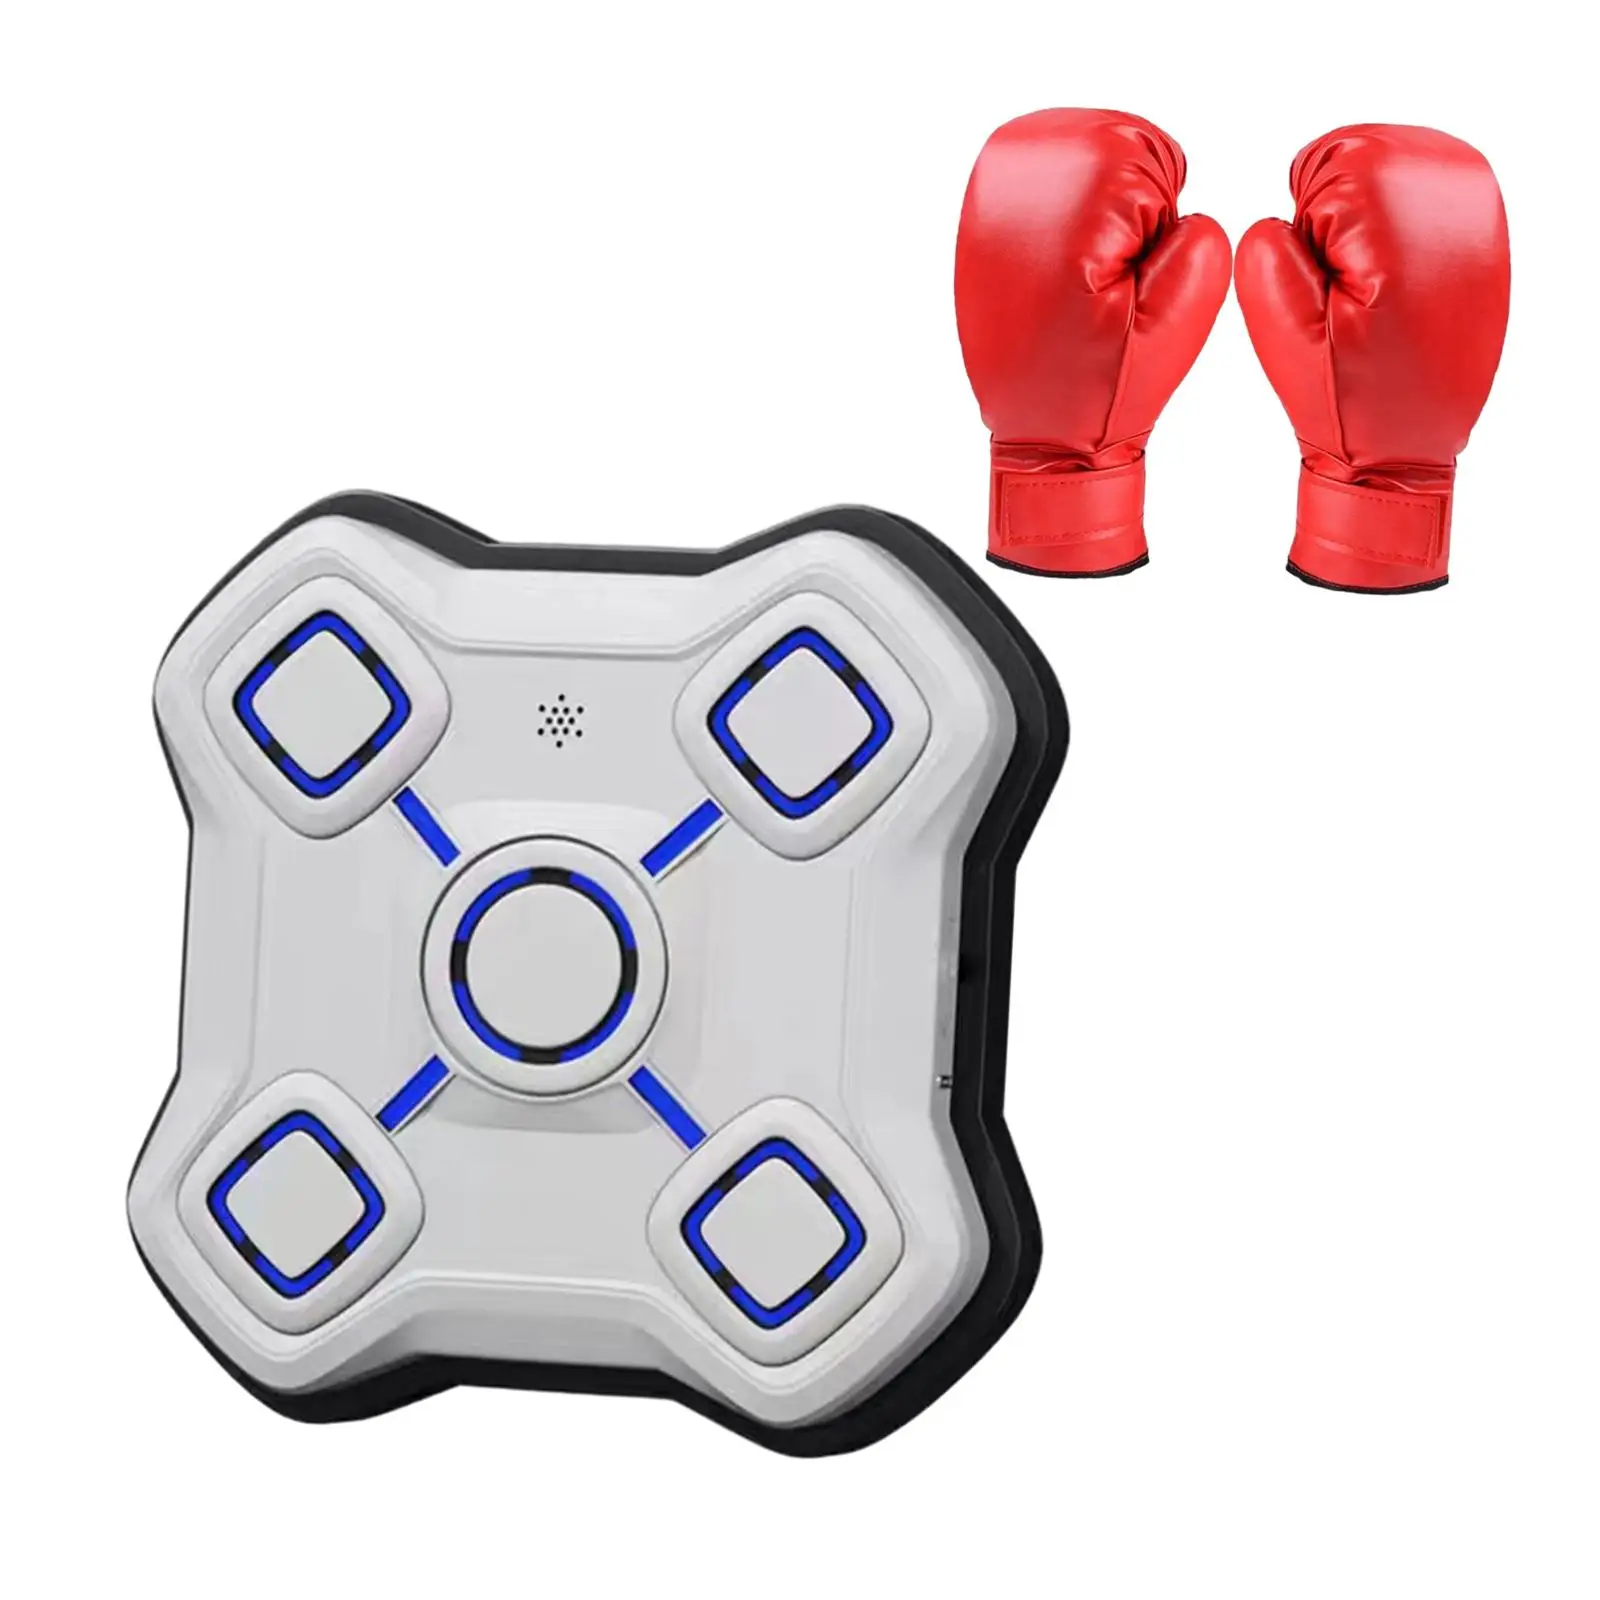 Music Boxing Machine Smart Boxing Trainer Wall Mounted Rhythm Wall Target for Reaction Response Training Martial Arts Home Sanda